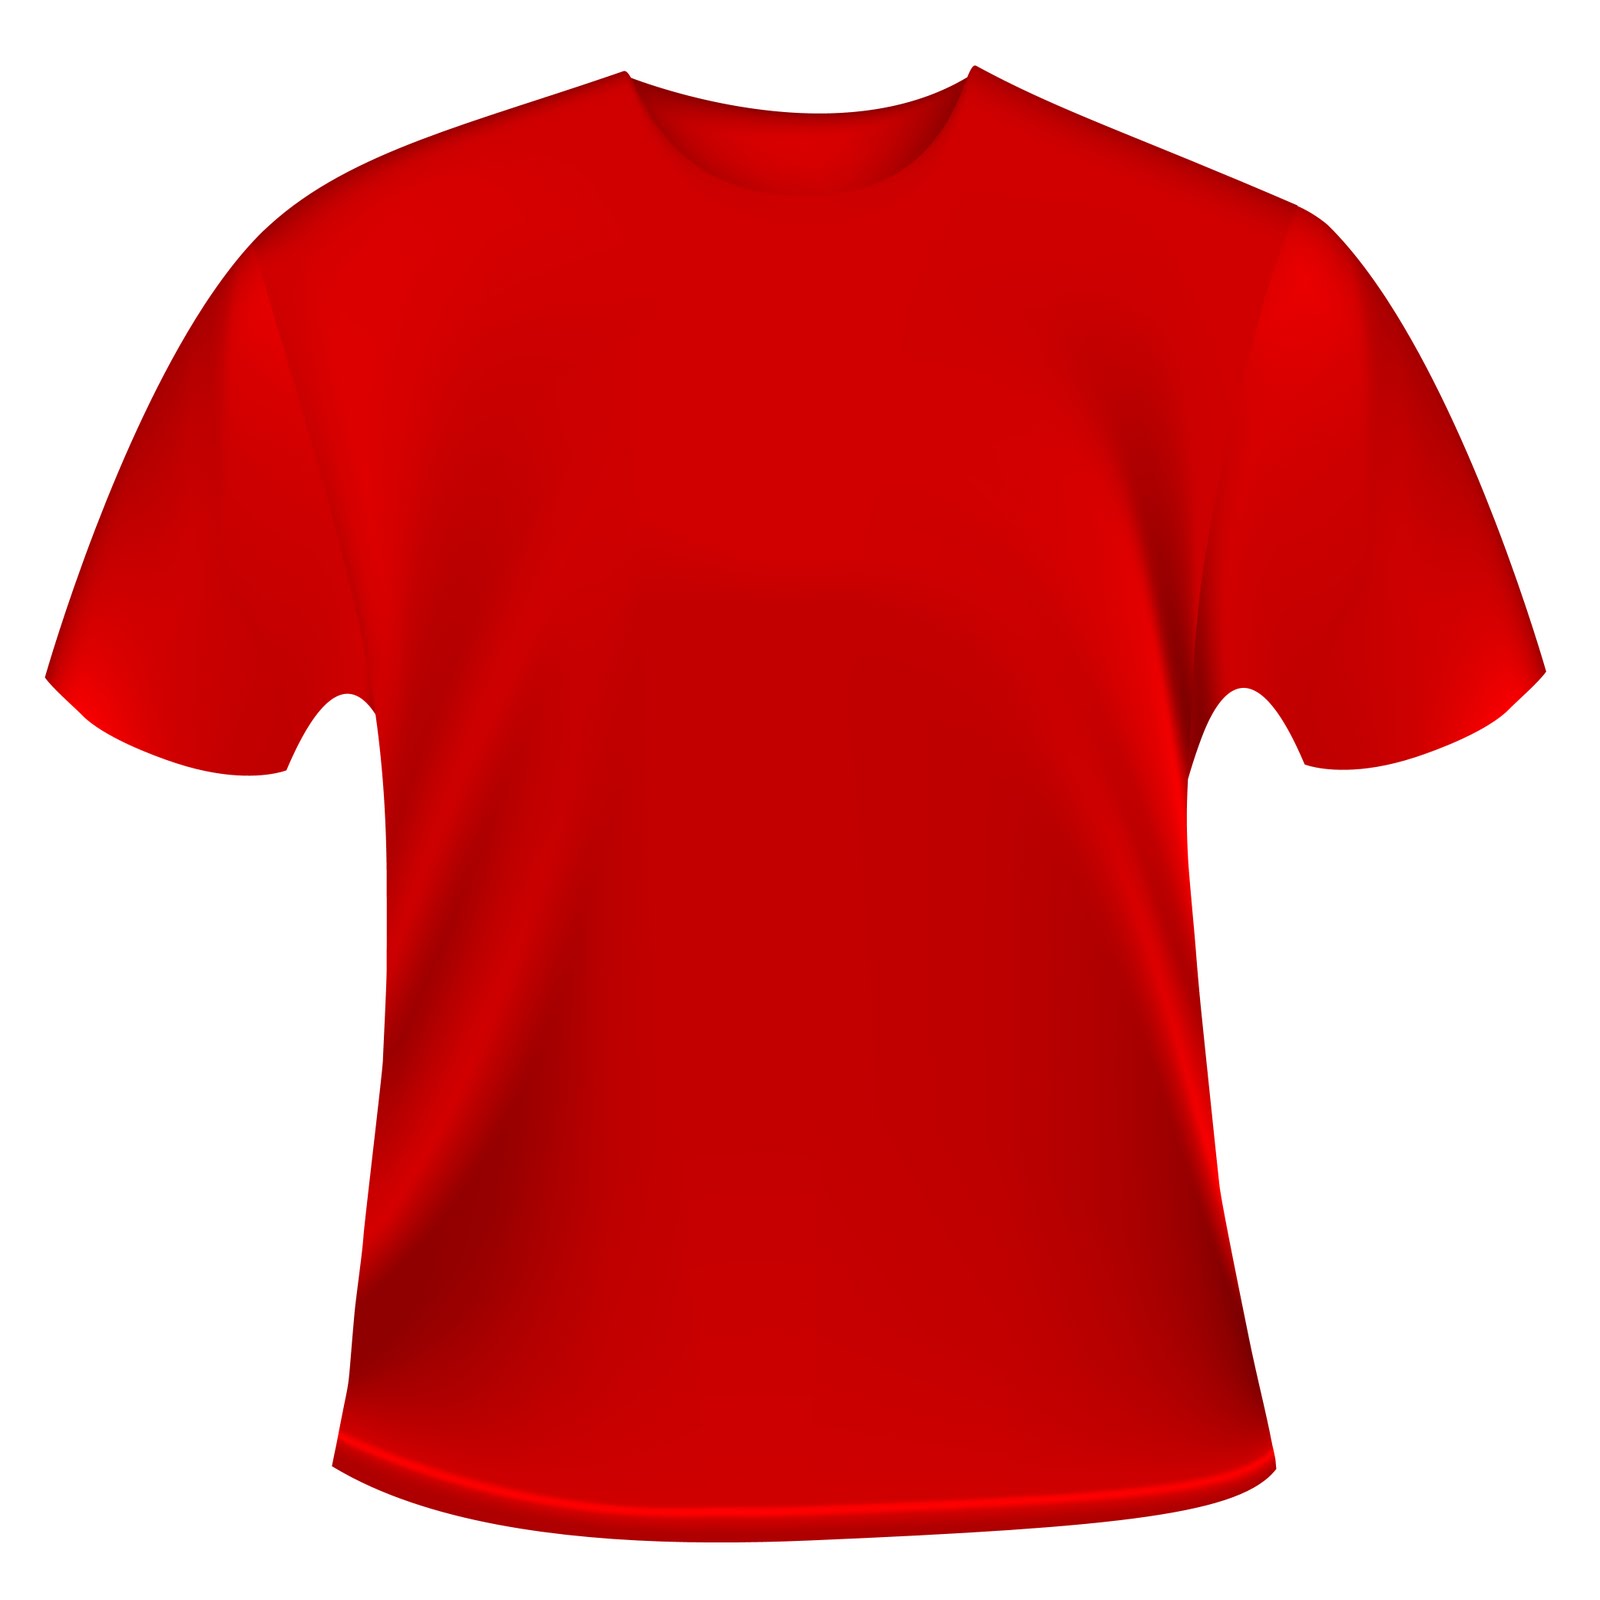 35 Red T Shirt Template   Free Cliparts That You Can Download To You    